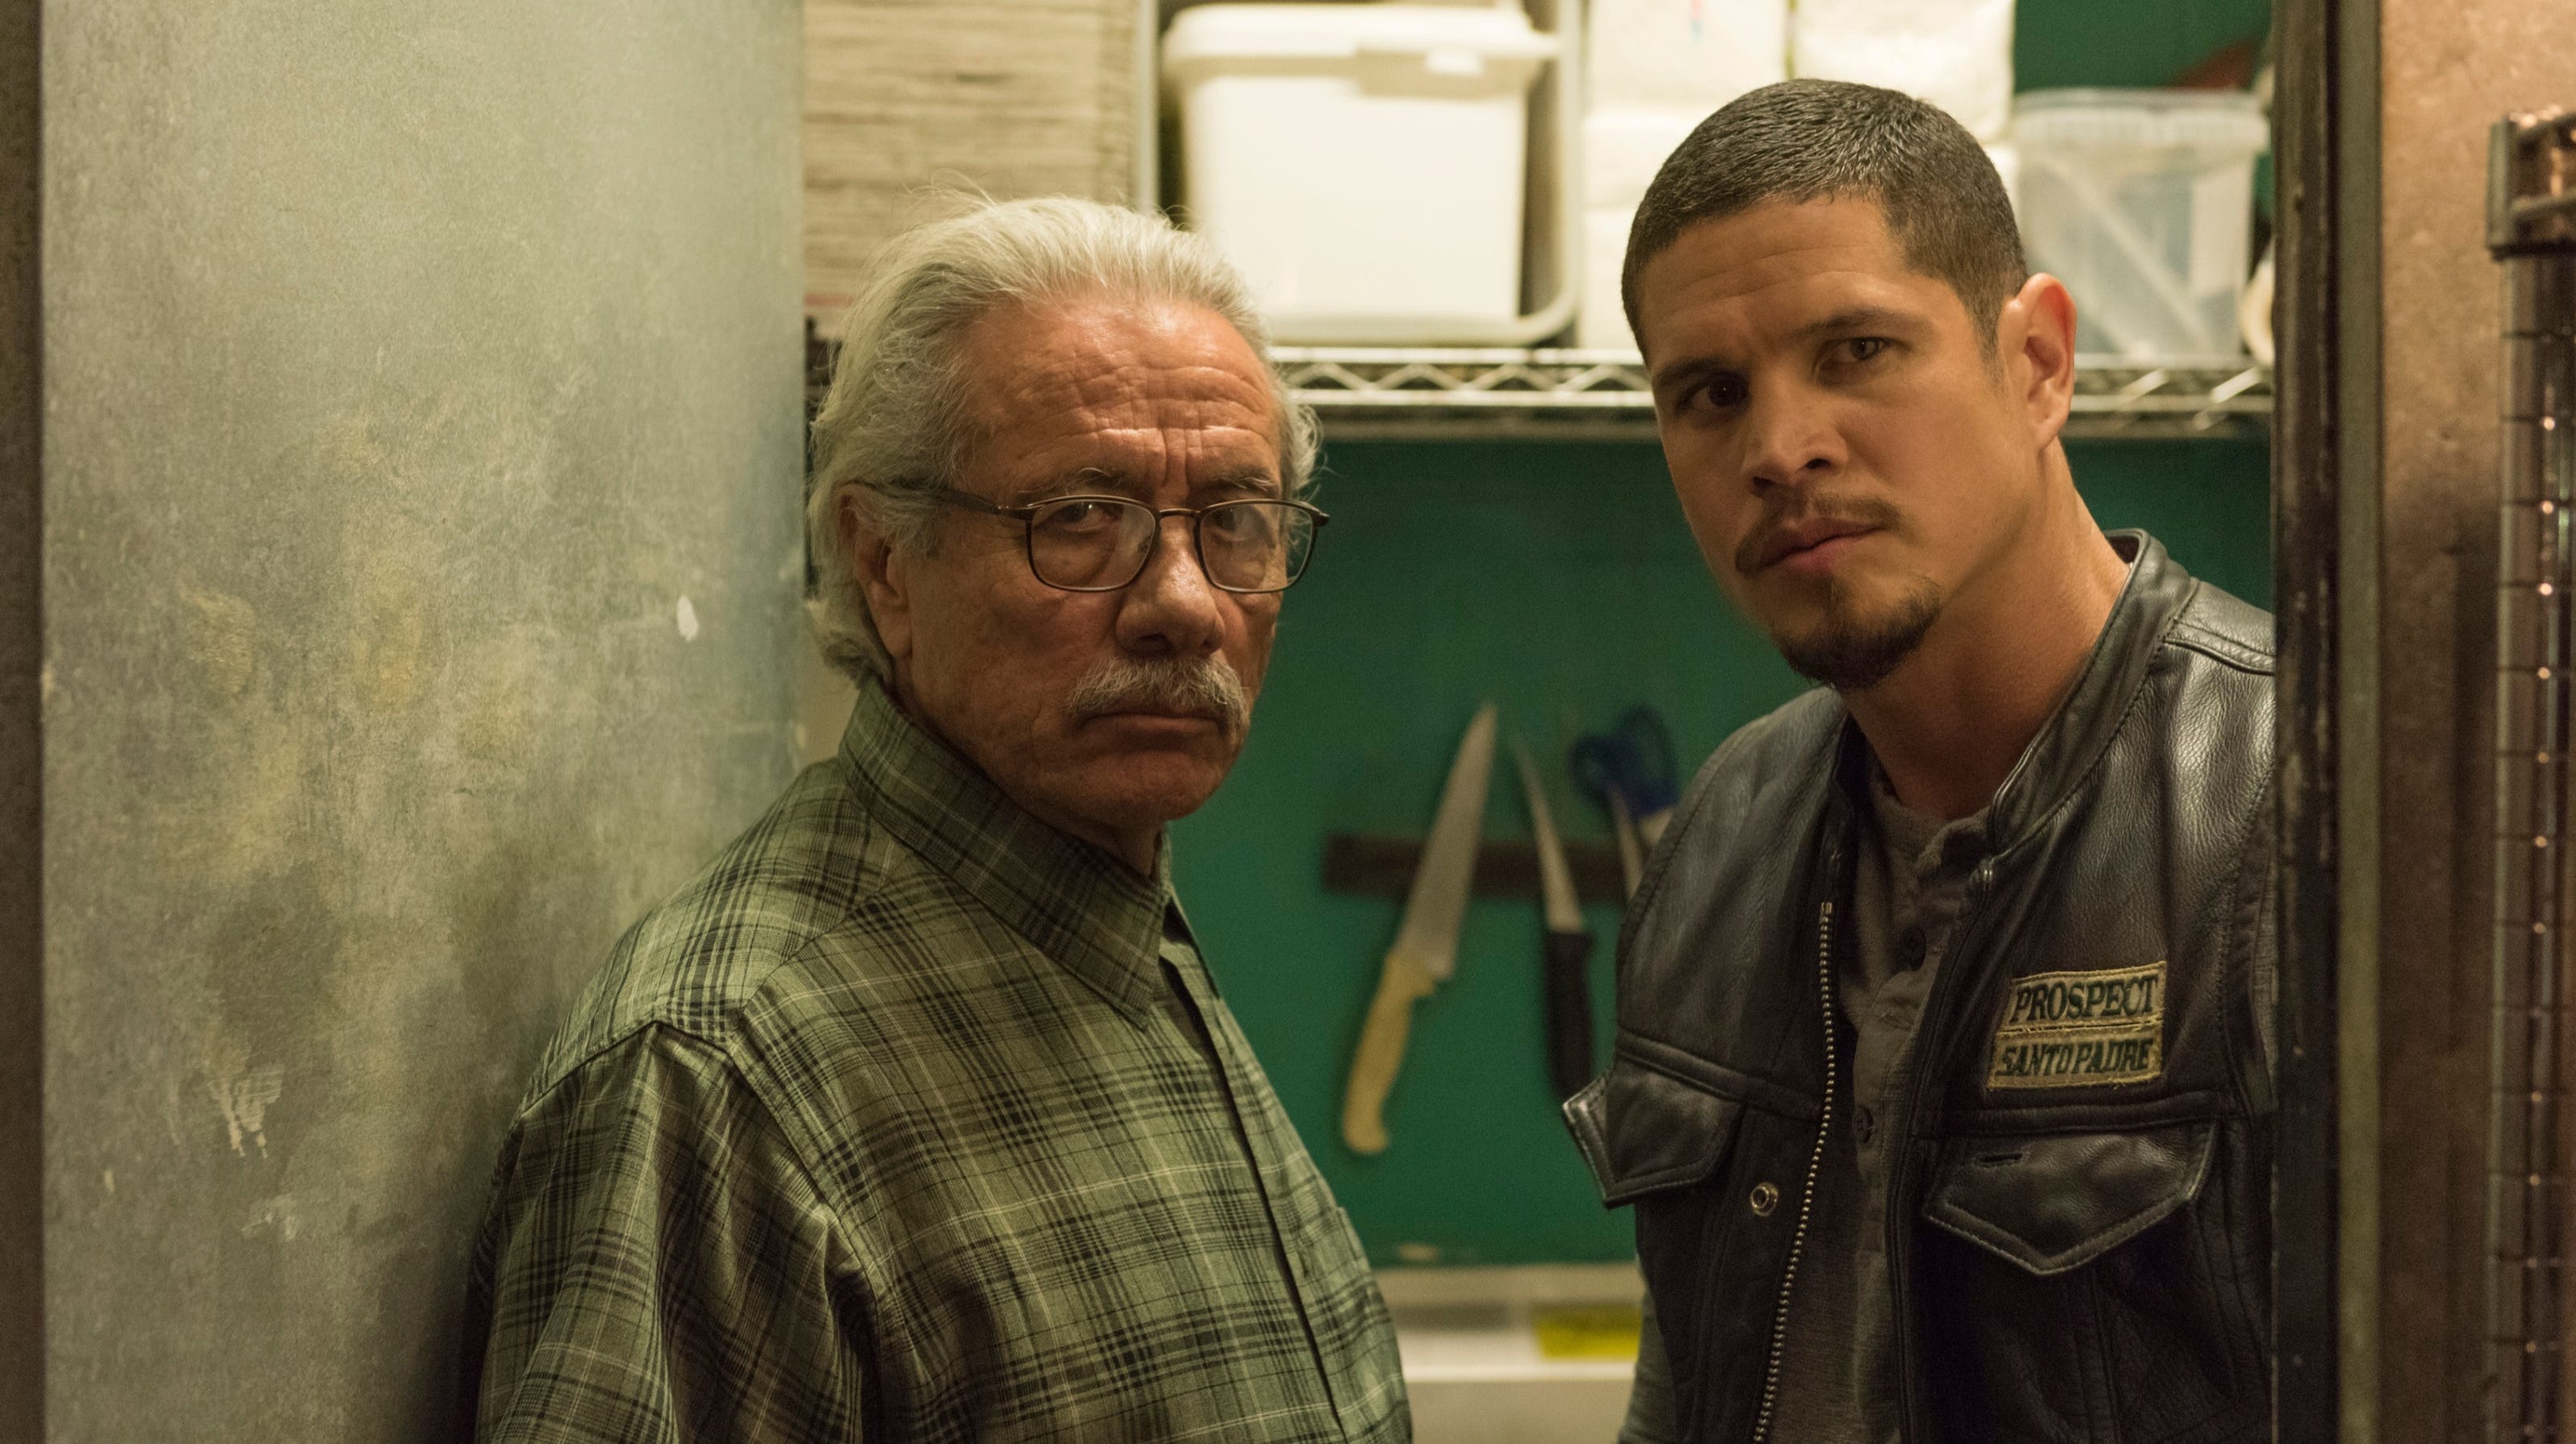 'Sons of Anarchy' spinoff 'Mayans M.C.' follows Latino motorcycle club